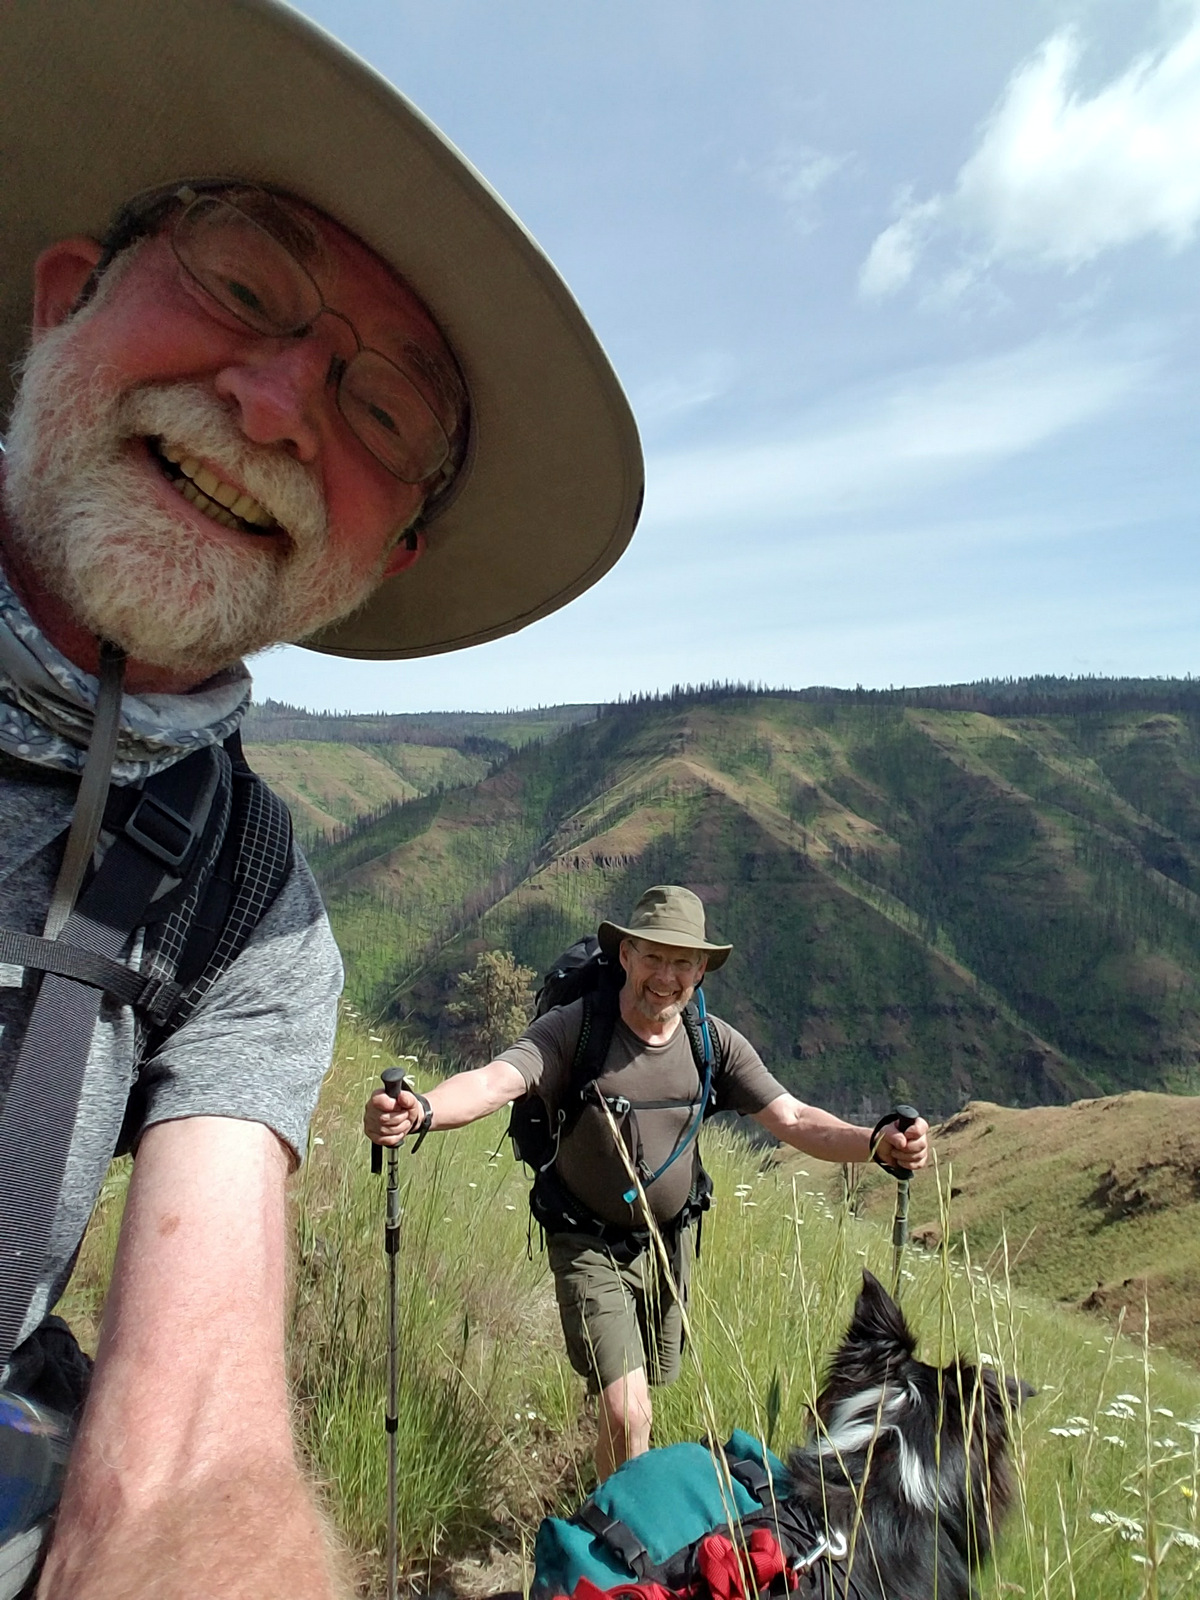  Coming up Smooth Ridge. Smiling as we didn't know what was ahead. Trail here was well defined and relatively clear. A few blow downs in a short section that was affected by what seemed to be a microburst of wind, maybe 2 dozen burned snags topped at